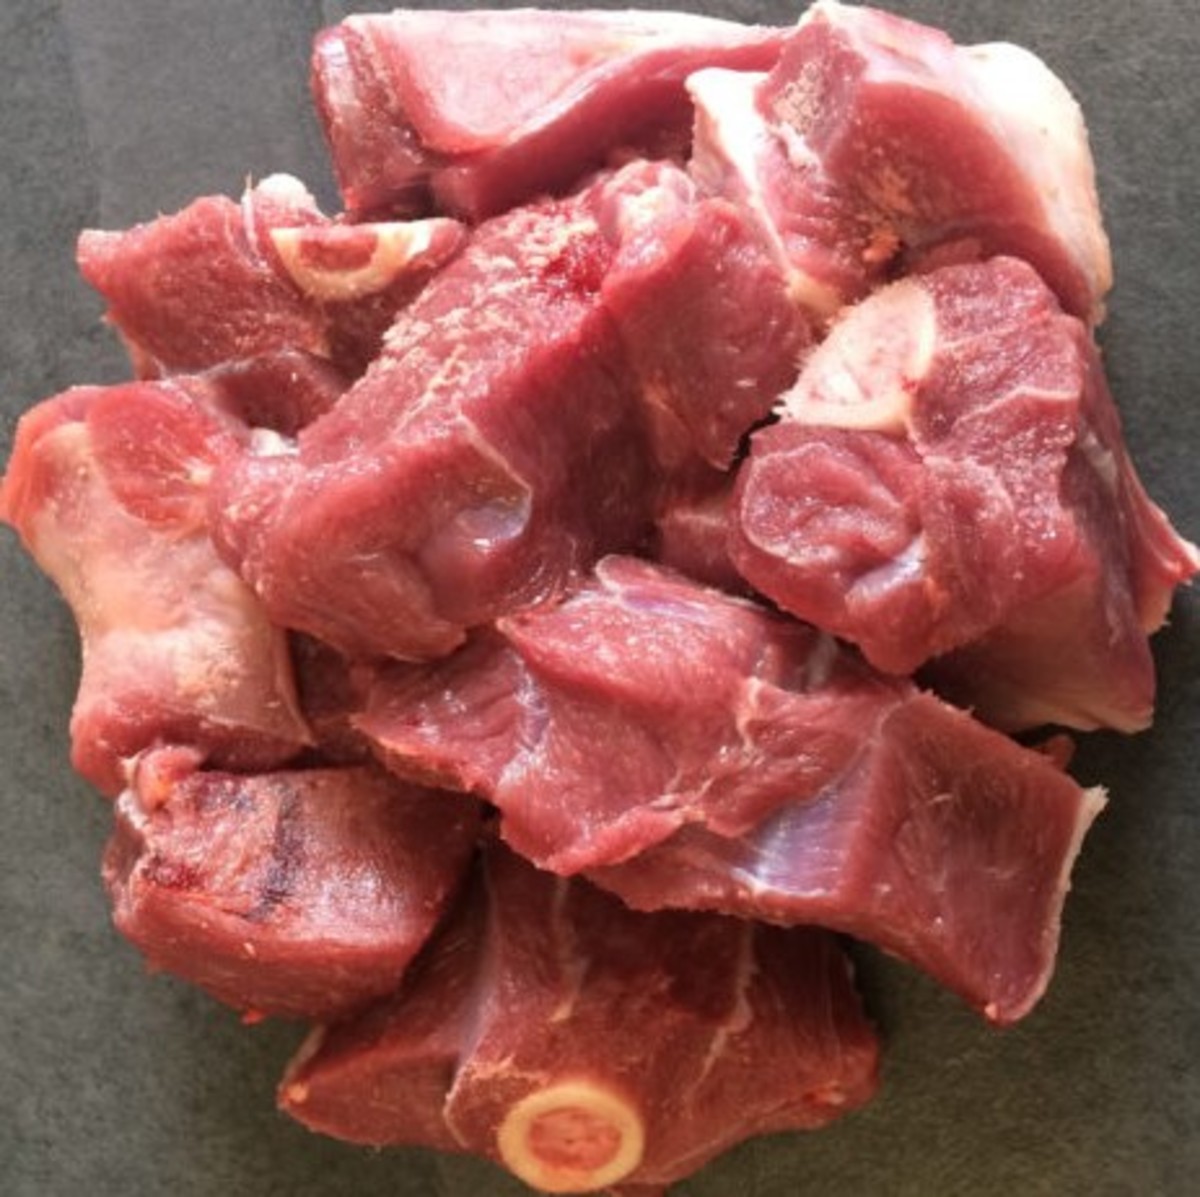 This is what cut-up goat meat looks like. You can also buy the cut-up meat from the store, if available.